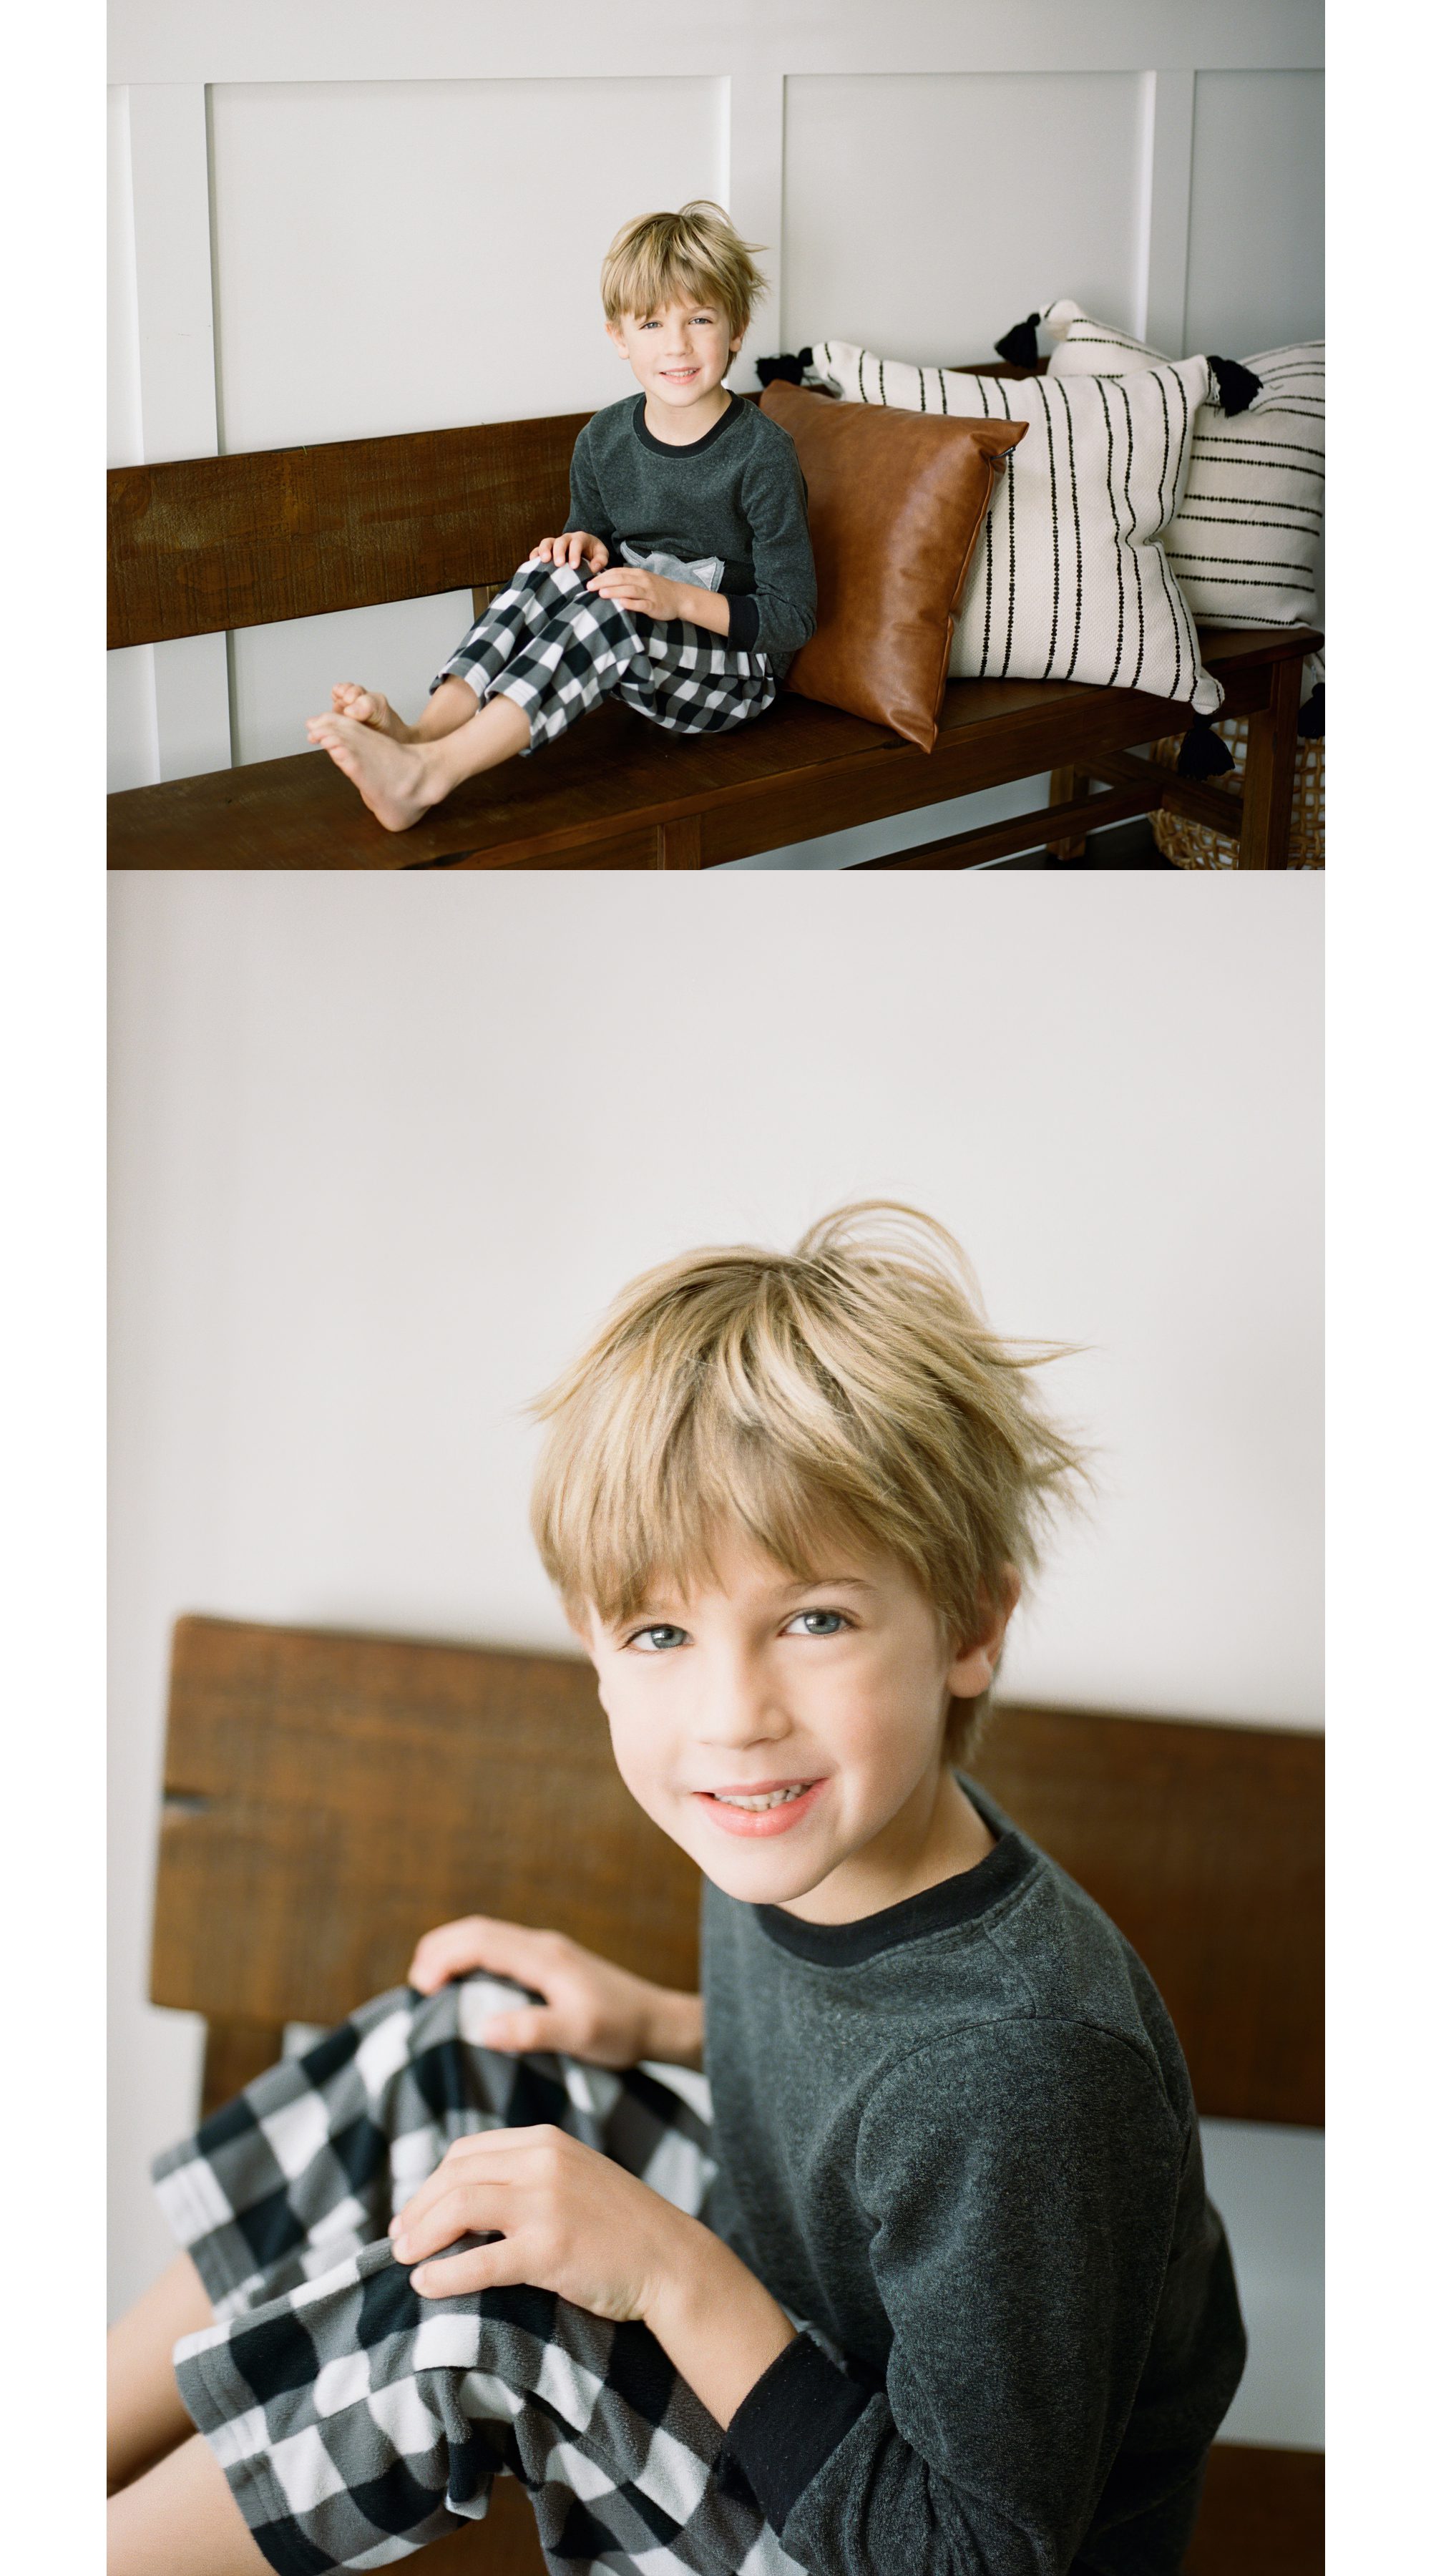 six year old boy in pajamas posing in his home - atlanta child photographer